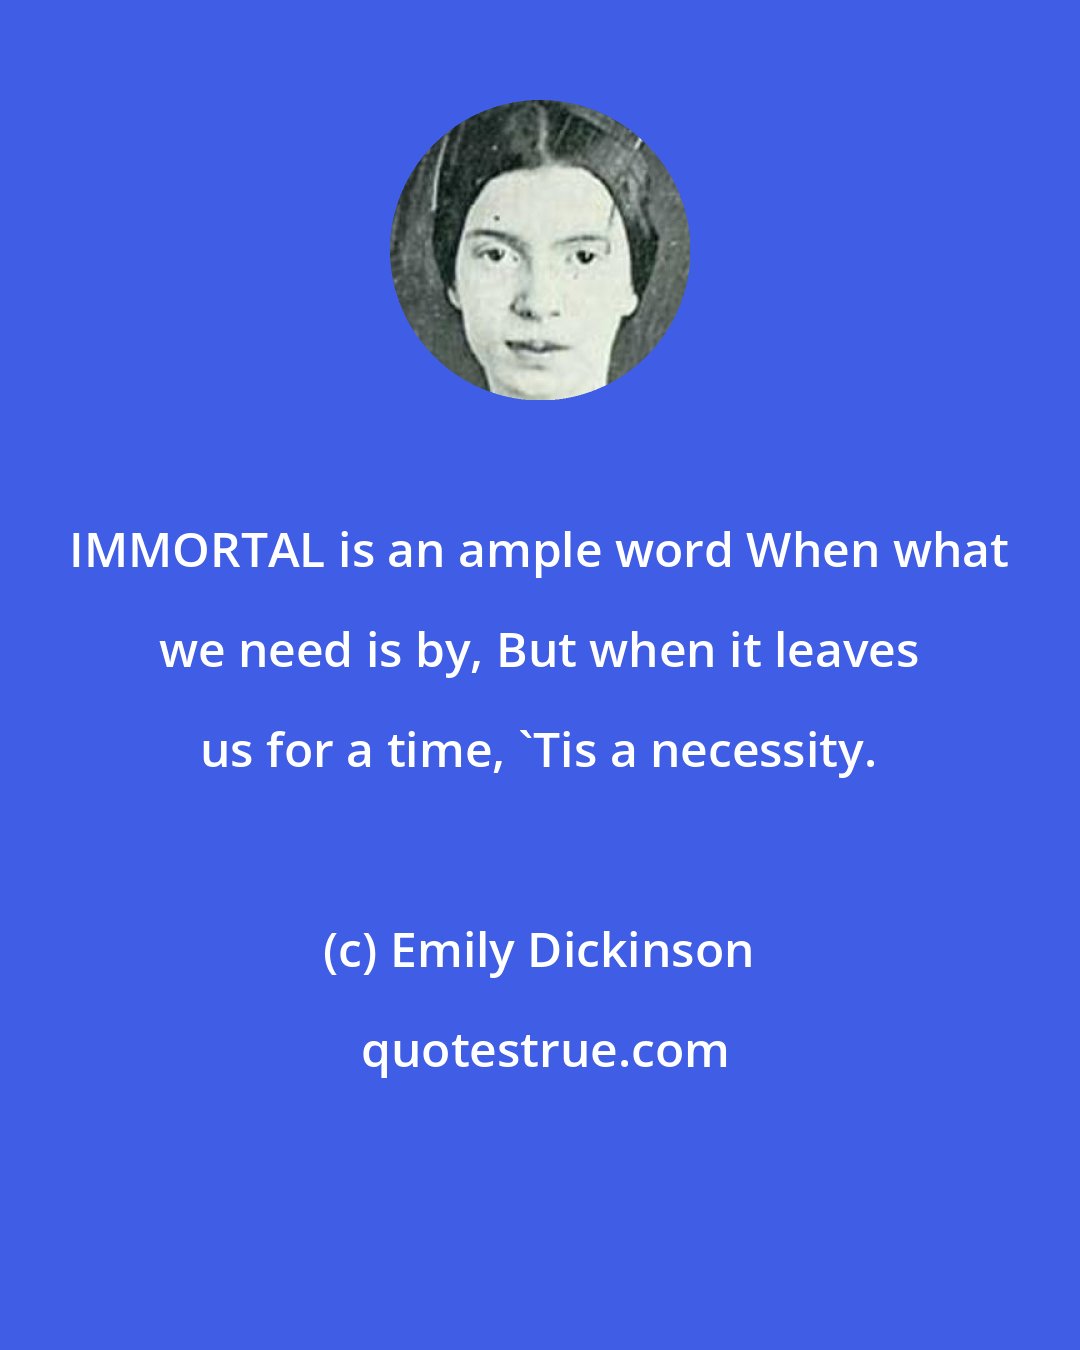 Emily Dickinson: IMMORTAL is an ample word When what we need is by, But when it leaves us for a time, 'Tis a necessity.